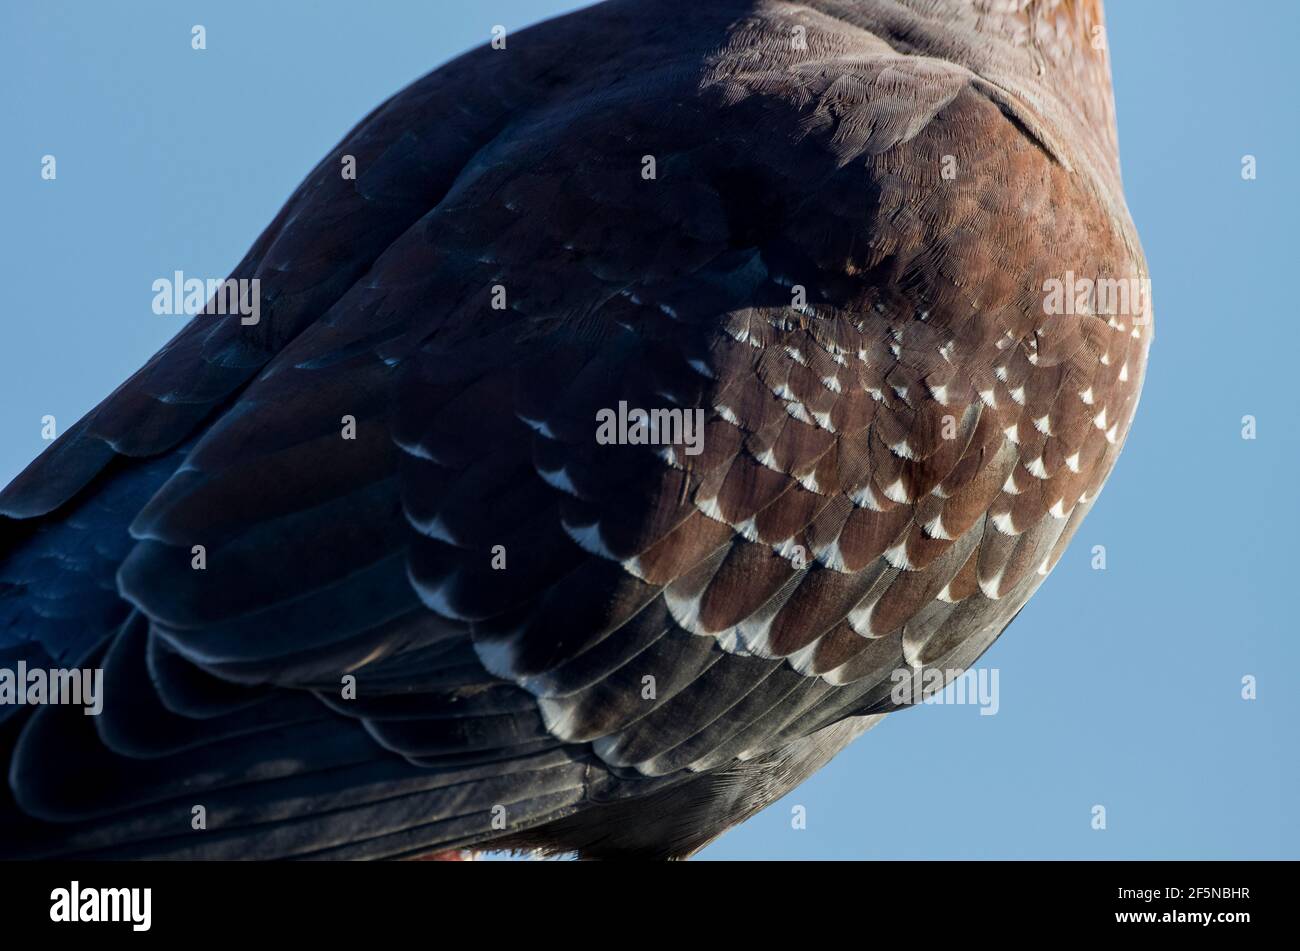 Close up of the wing of an African Rock Pigeon / Speckled pigeon (Columba guinea) on Table Mountain, Cape Town, South Africa. Stock Photo